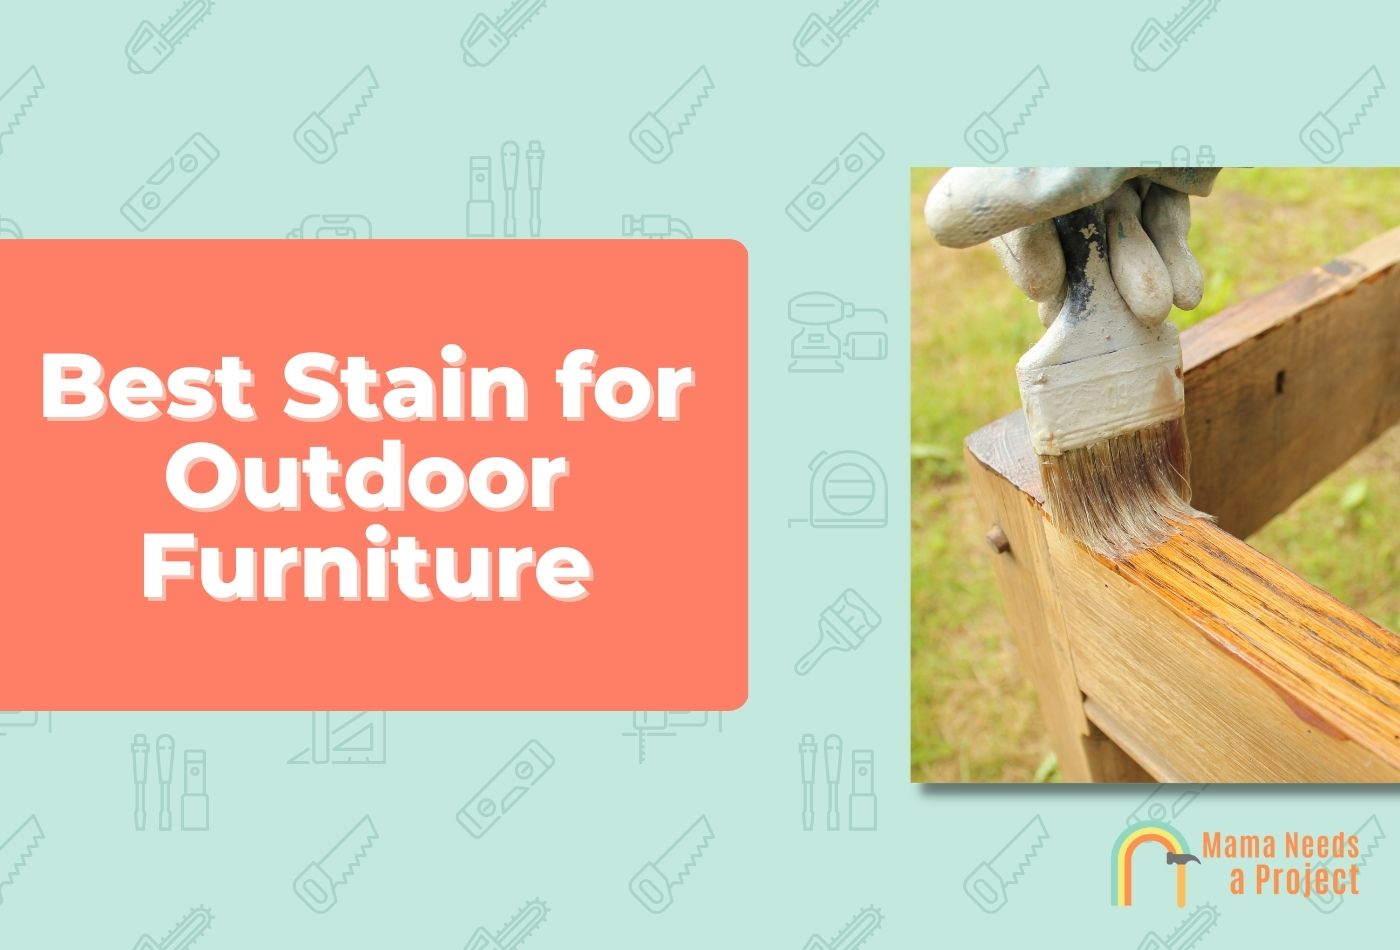 Best Stain for Outdoor Furniture